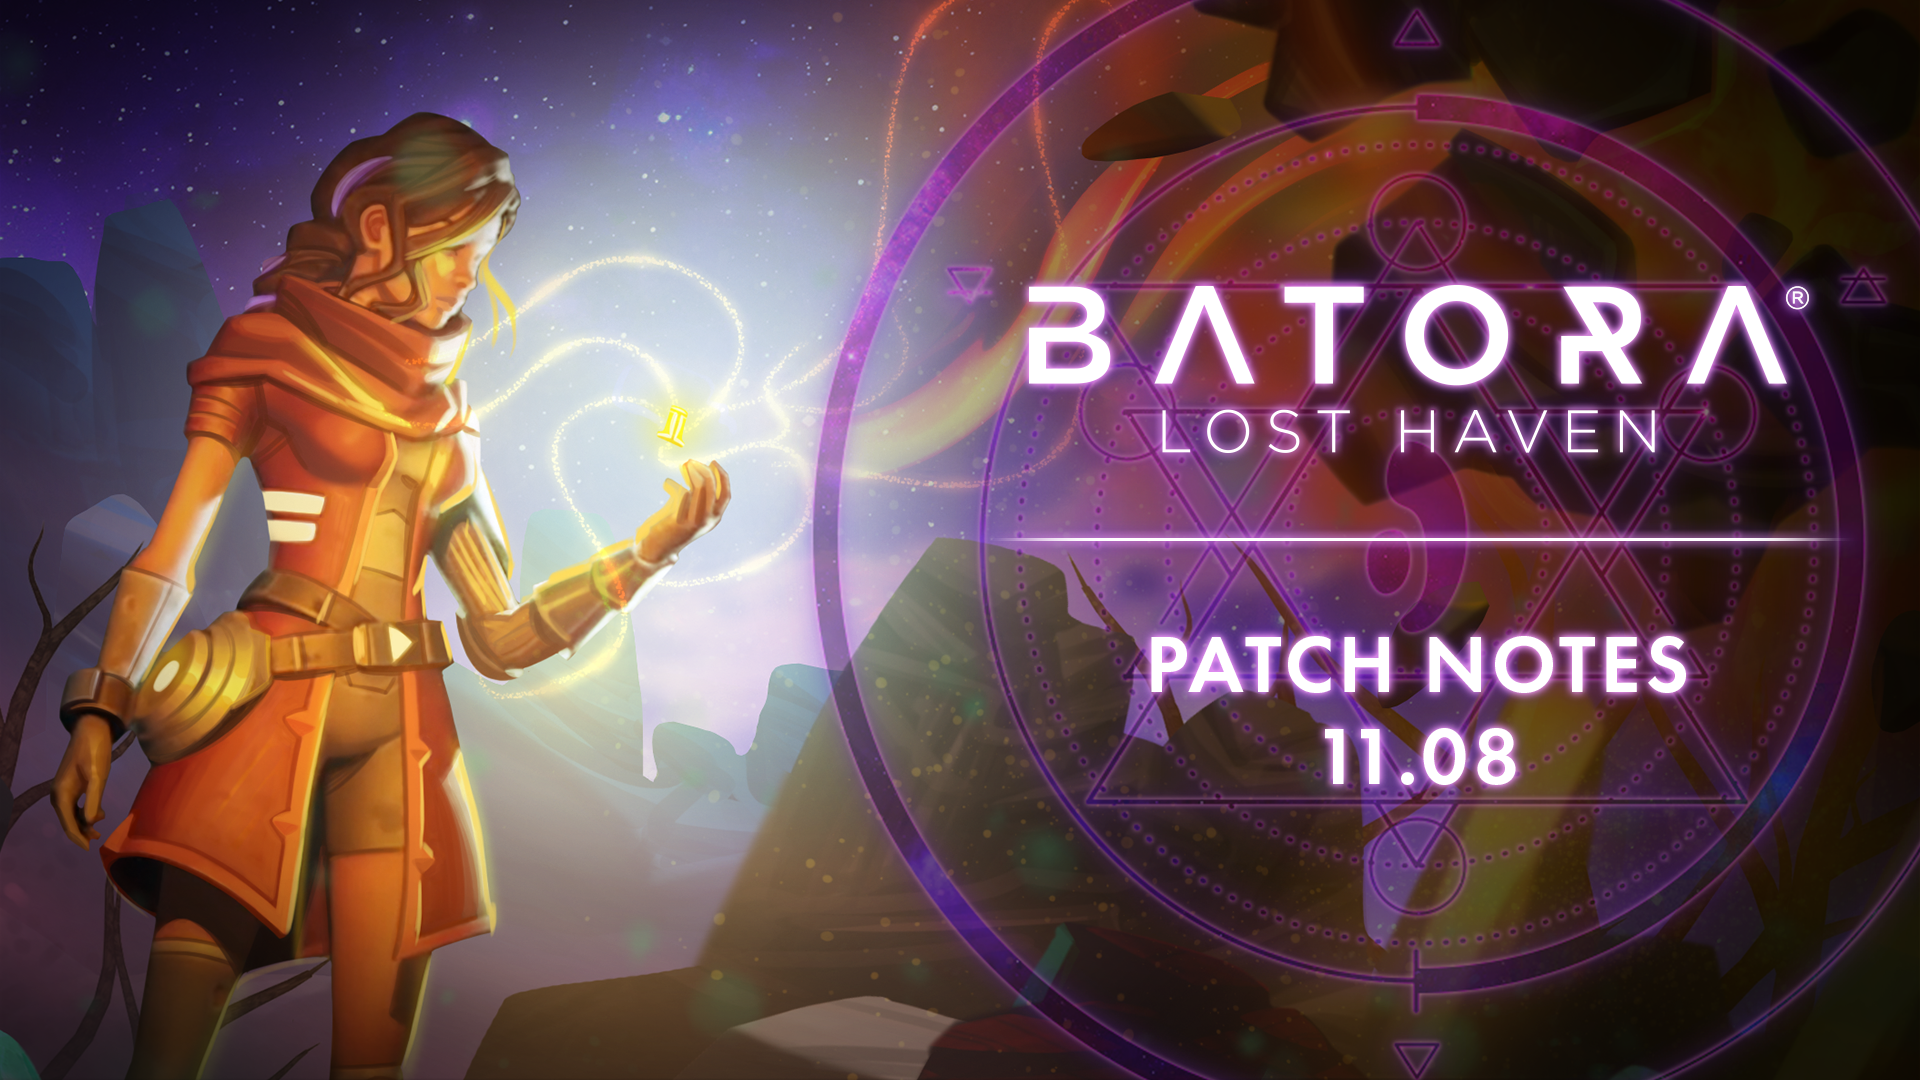 Improvements available in the new Batora: Lost Haven patch